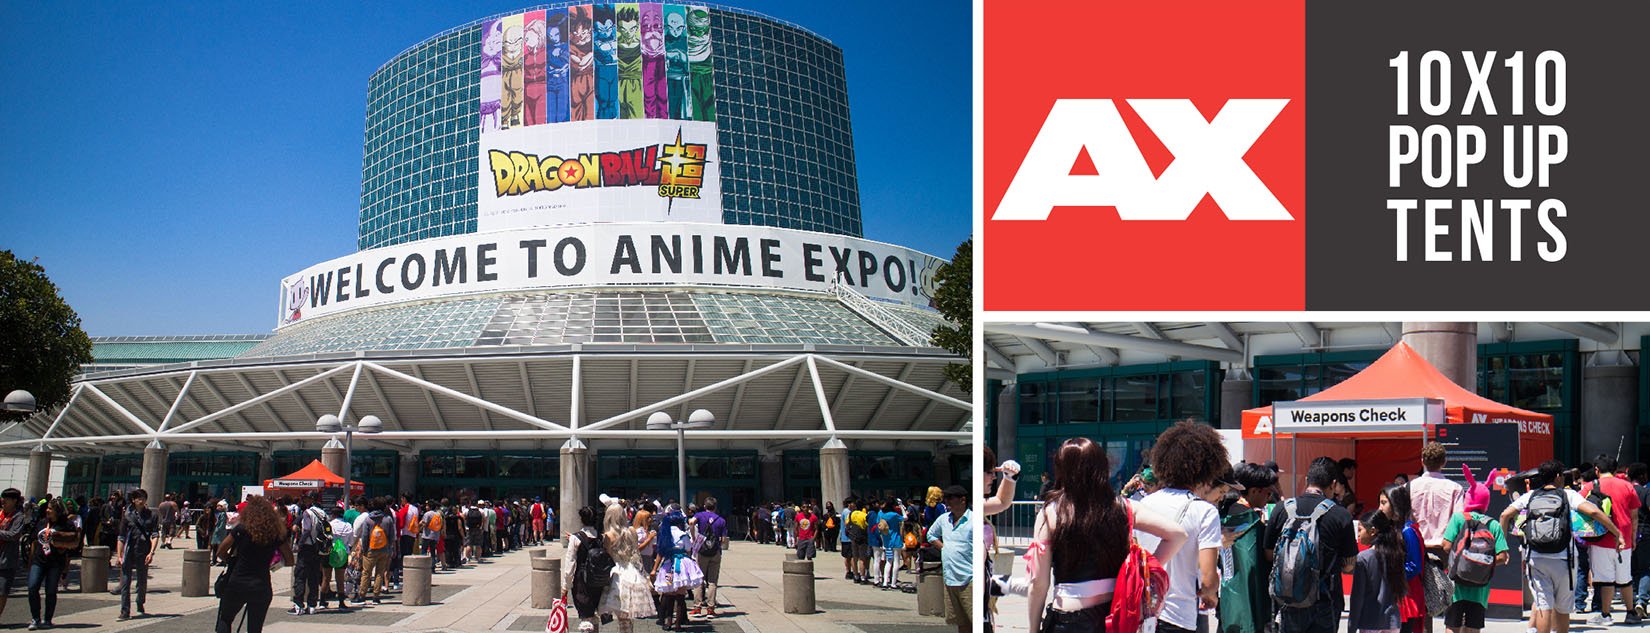 Anime Expo at the LA Convention Center